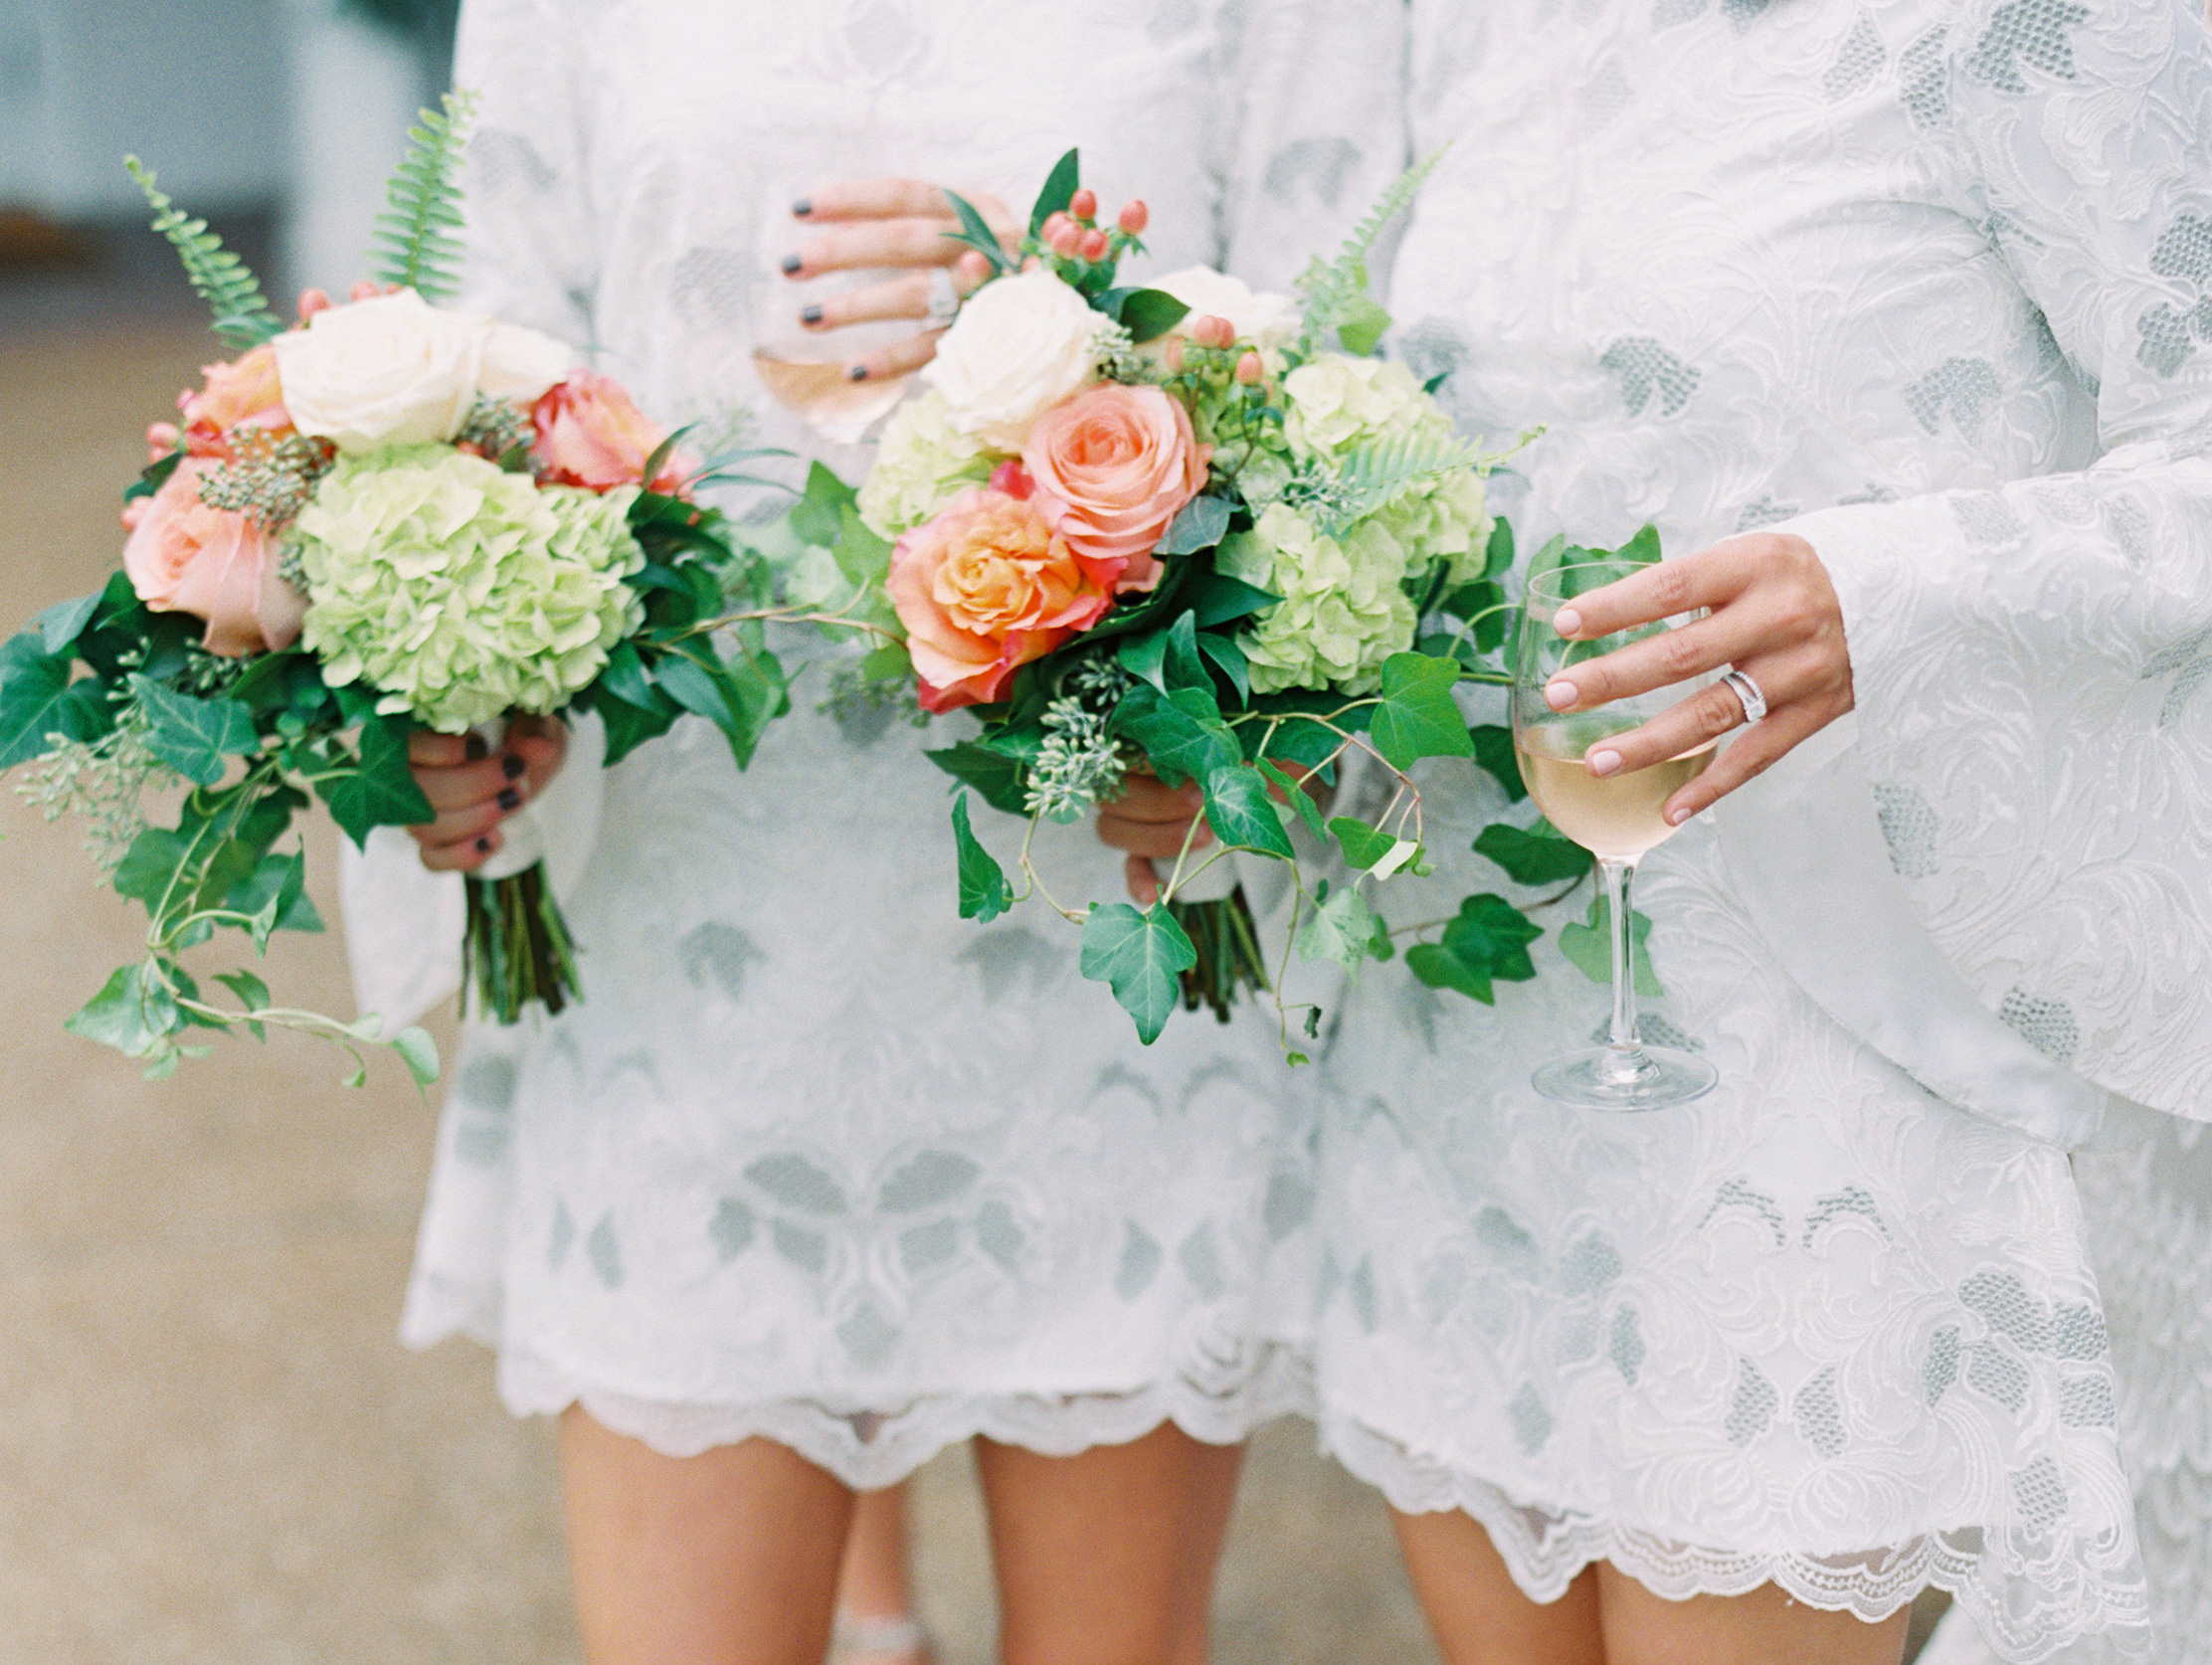 Can a Wedding Guest Really Wear White?